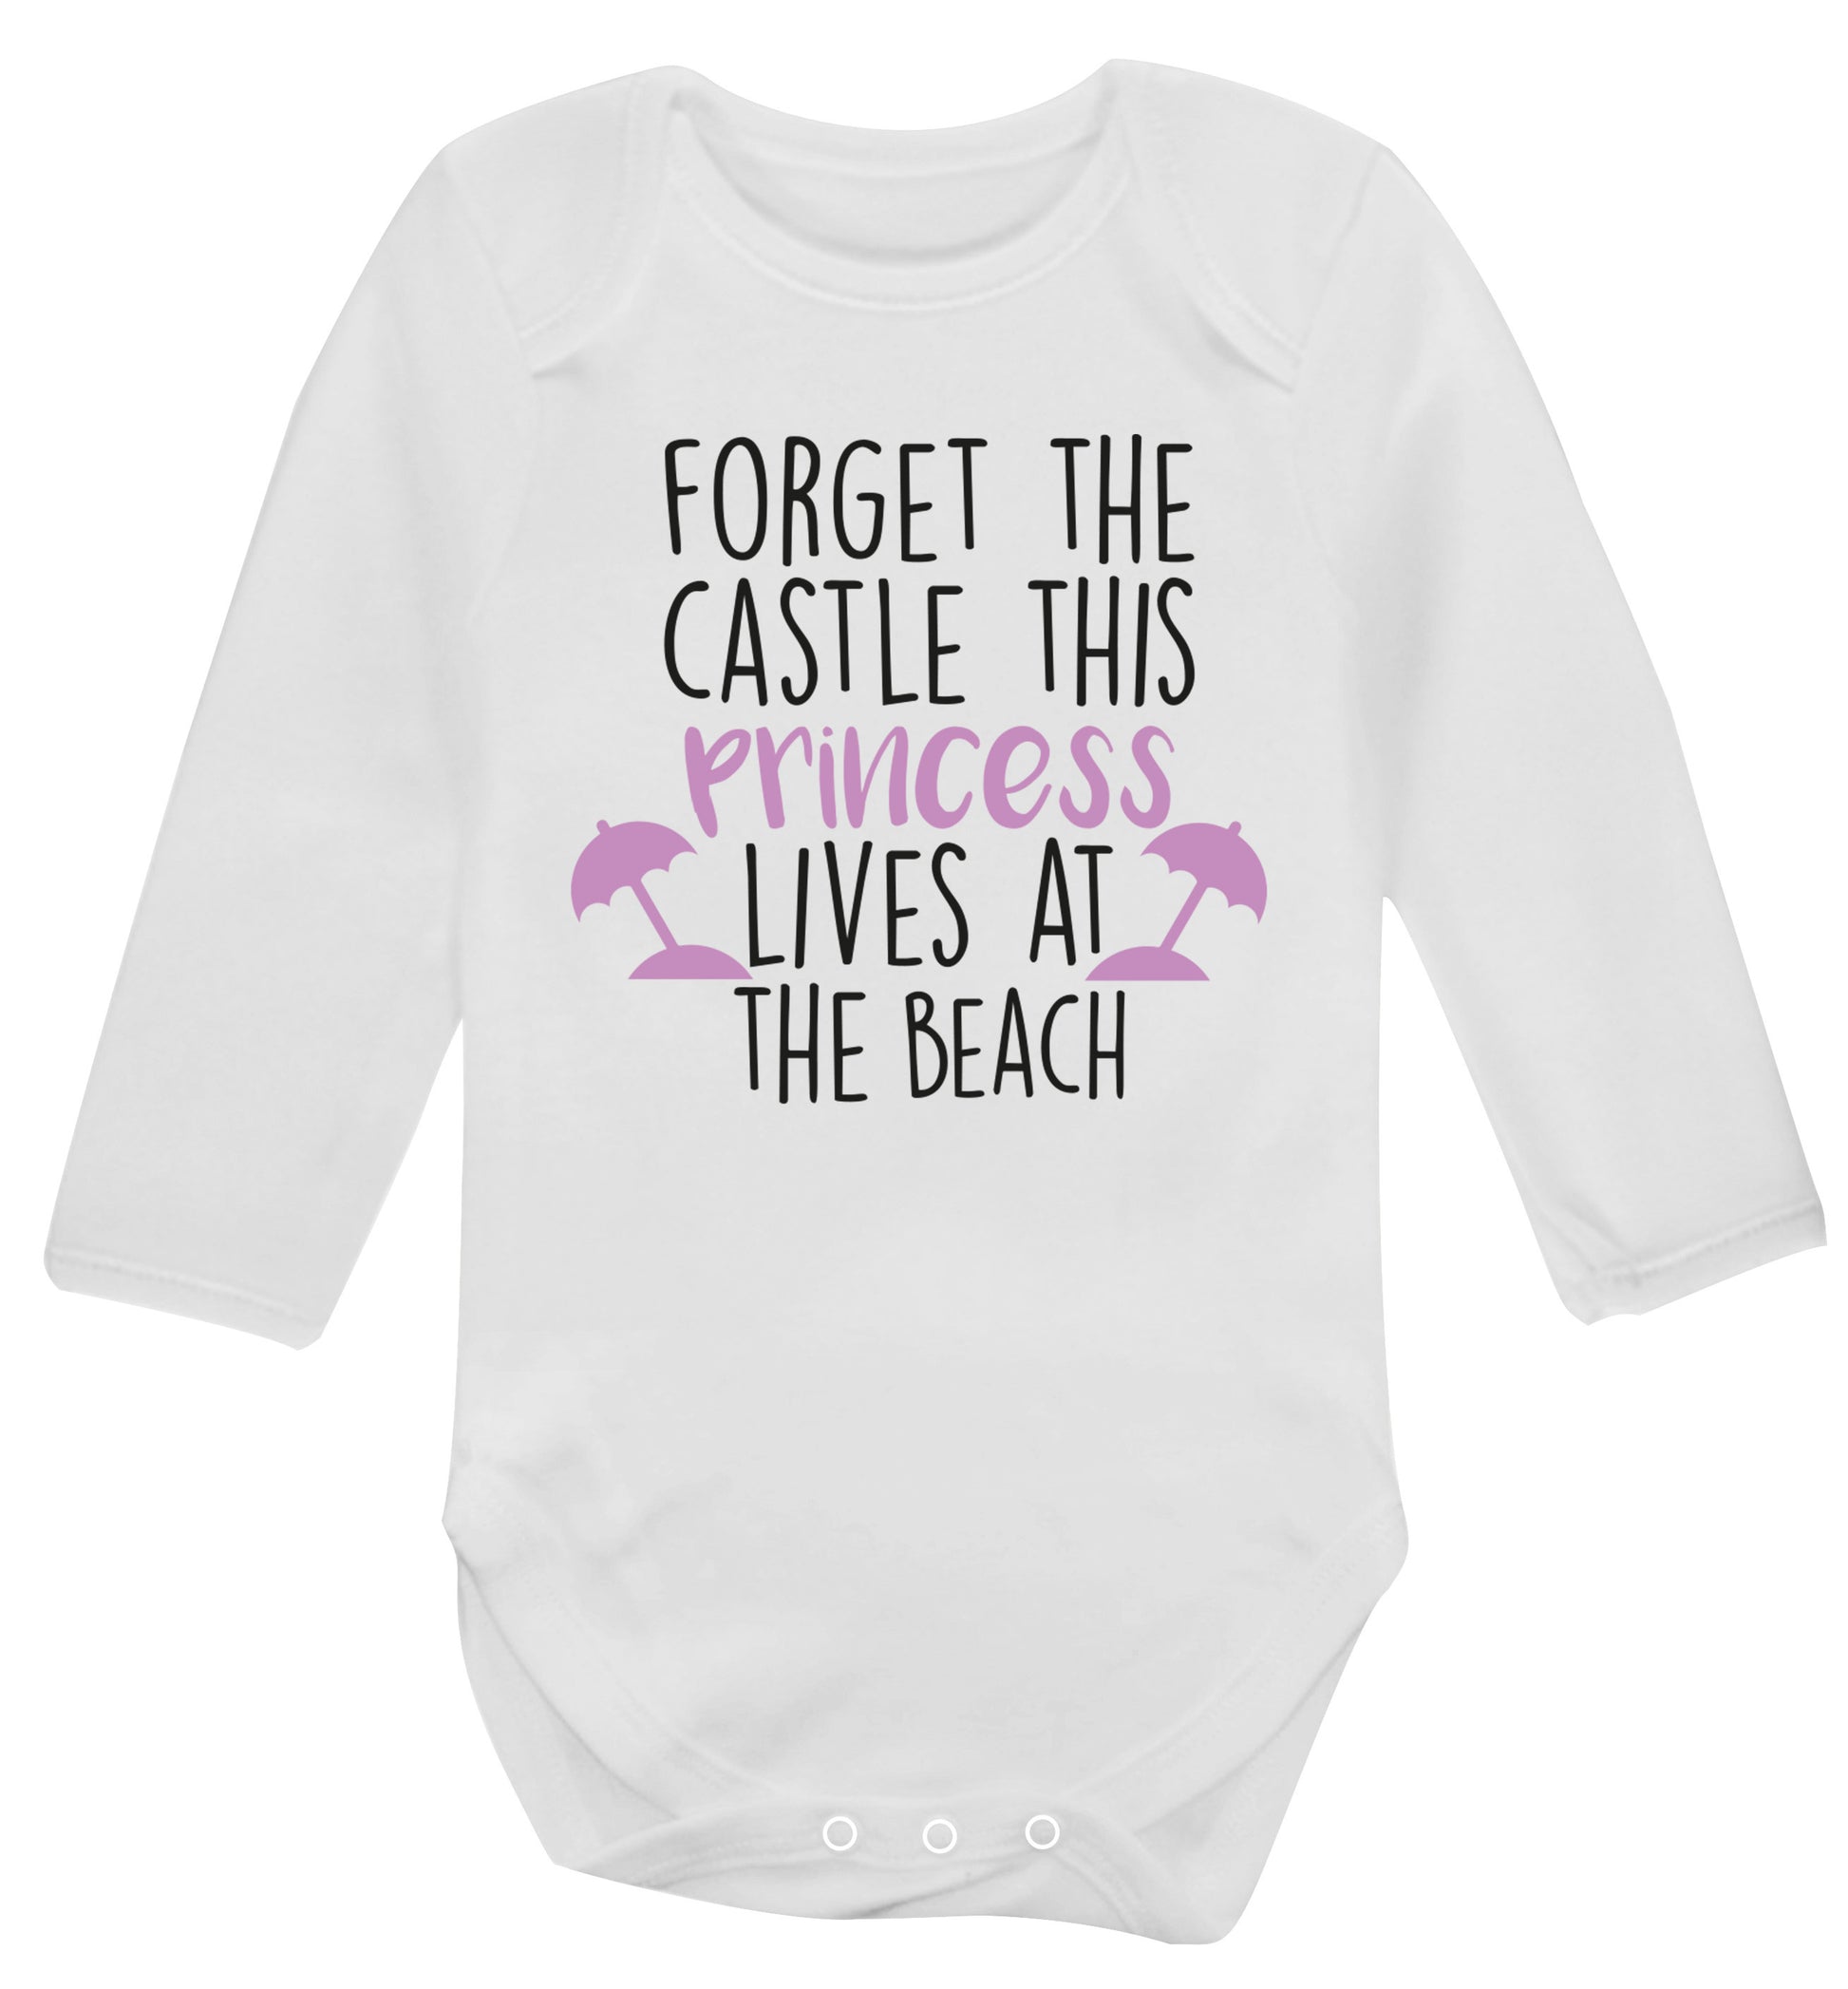 Forget the castle this princess lives at the beach Baby Vest long sleeved white 6-12 months